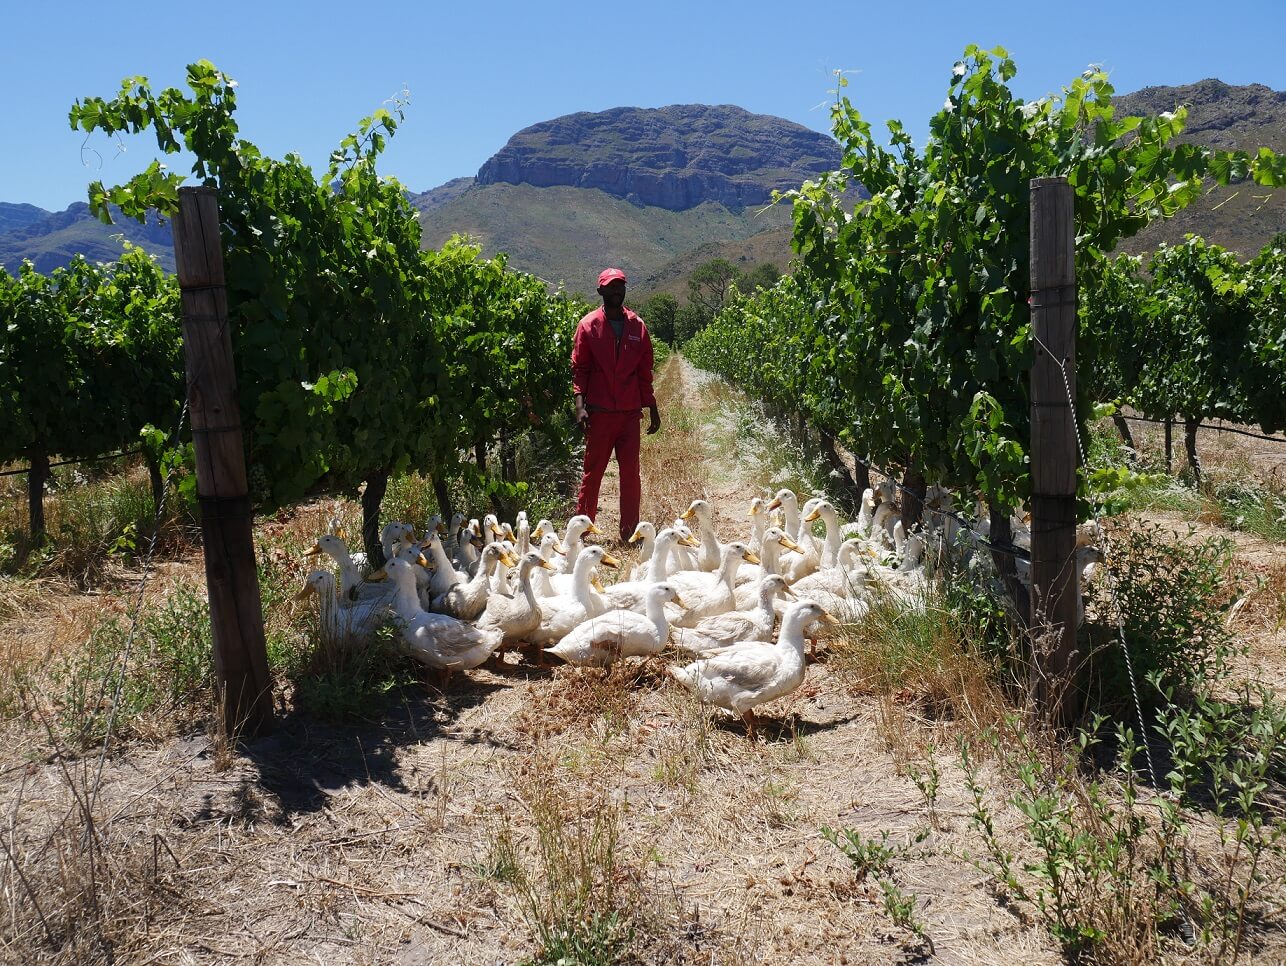 A visit from Avondale Wines